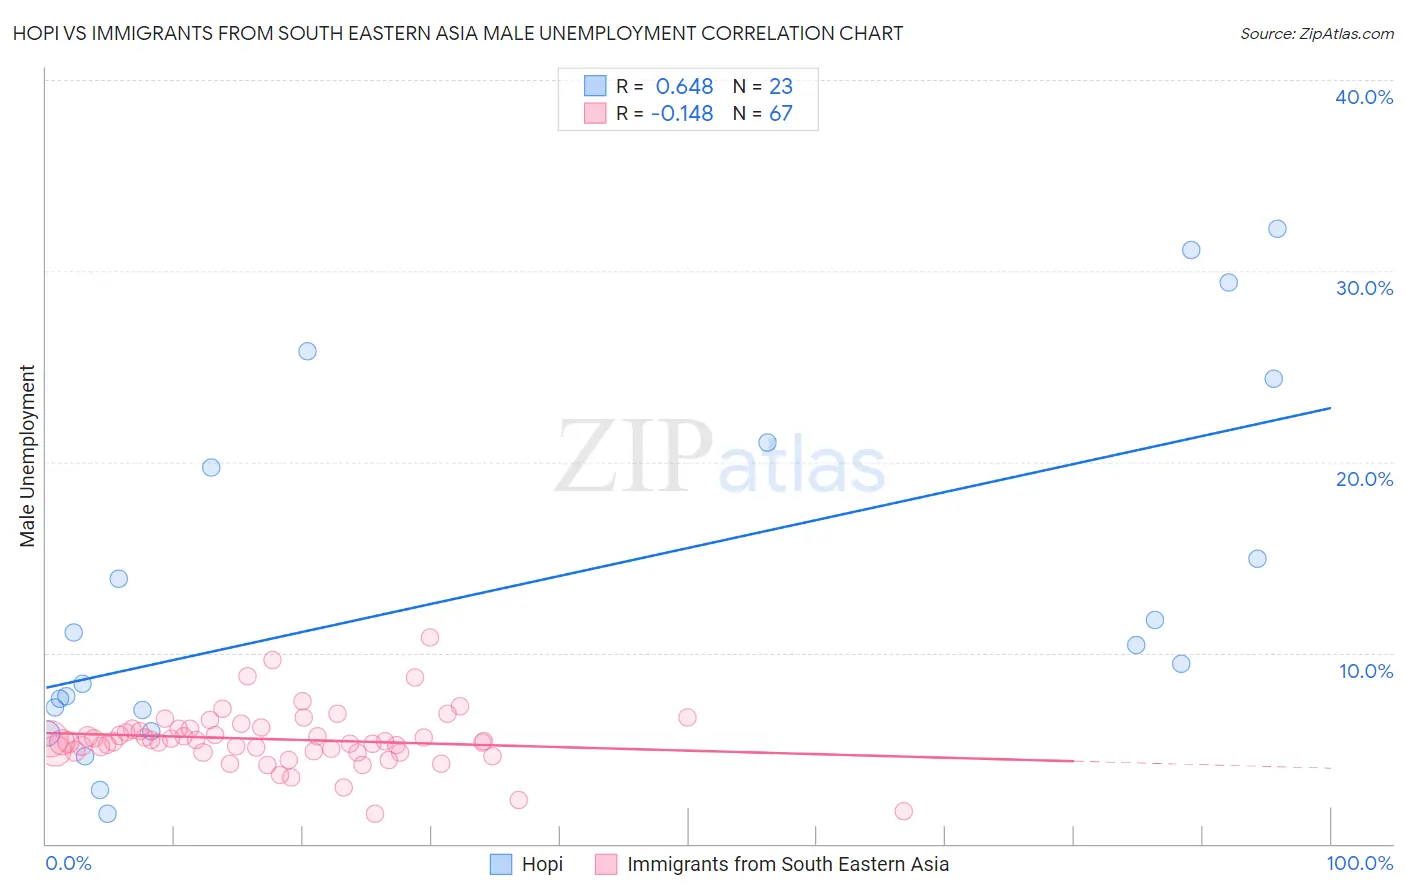 Hopi vs Immigrants from South Eastern Asia Male Unemployment